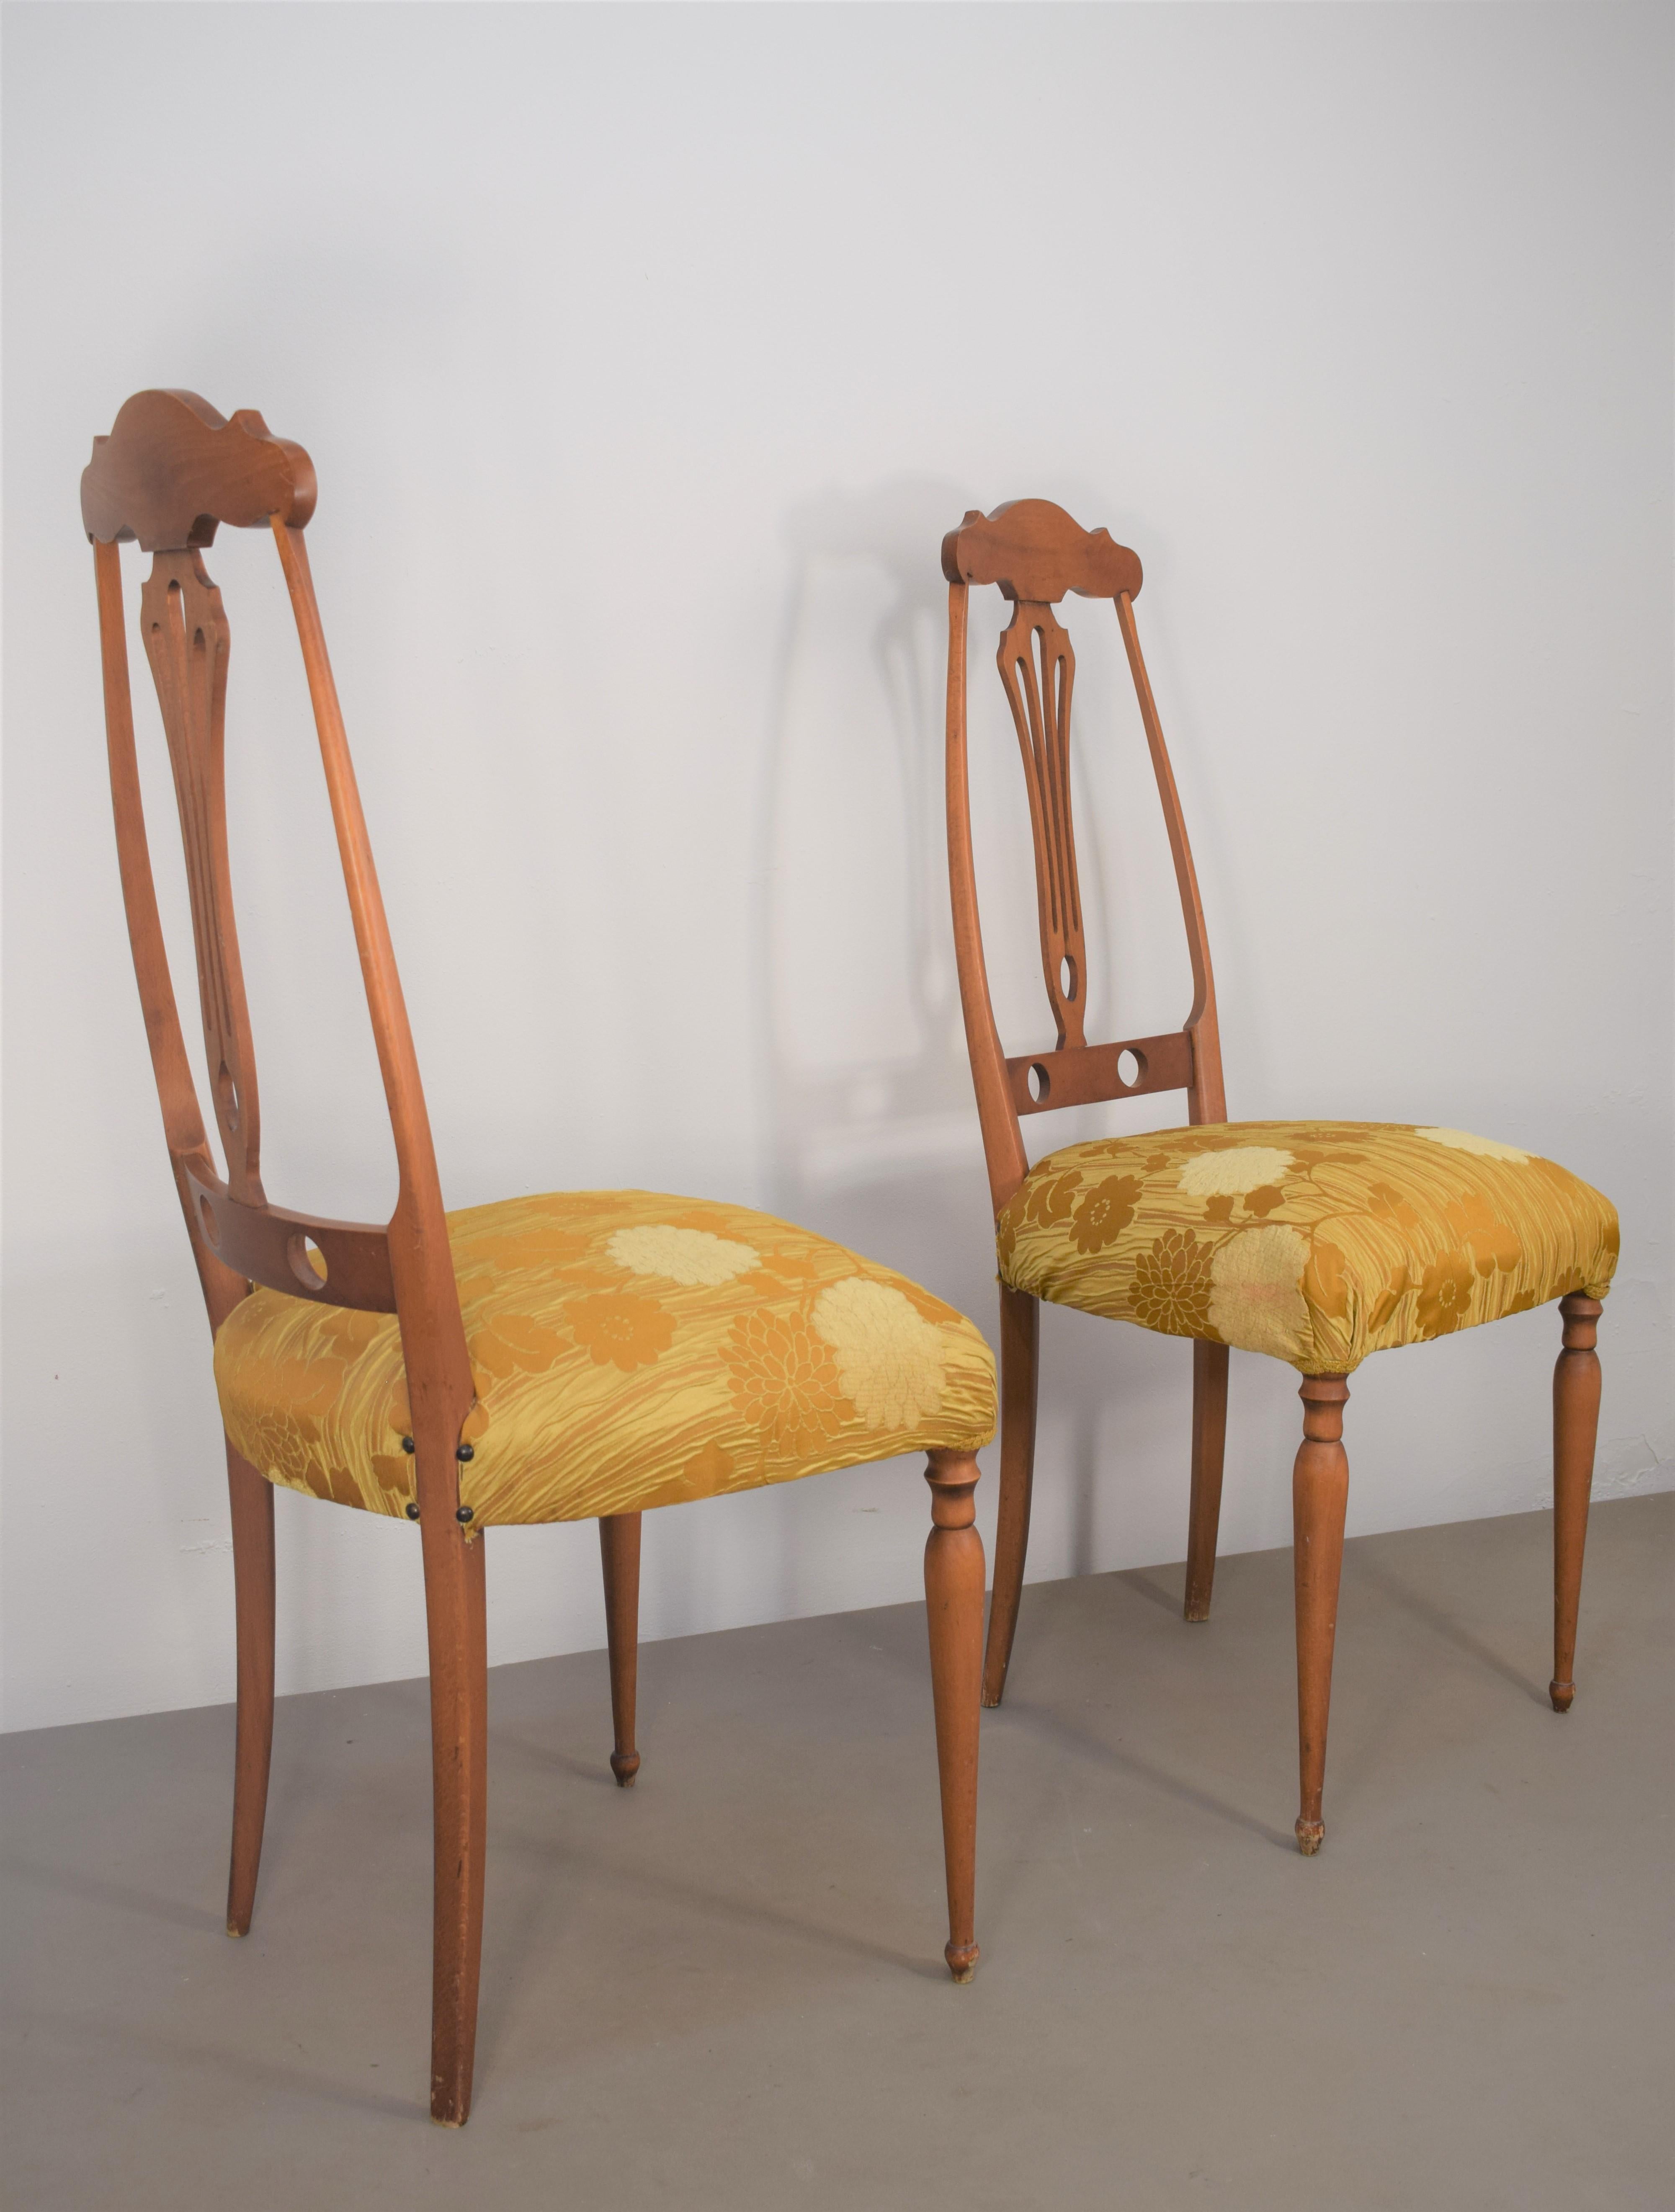 Wood Pair of Italian Chairs by Pozzi & Verga, 1950s For Sale